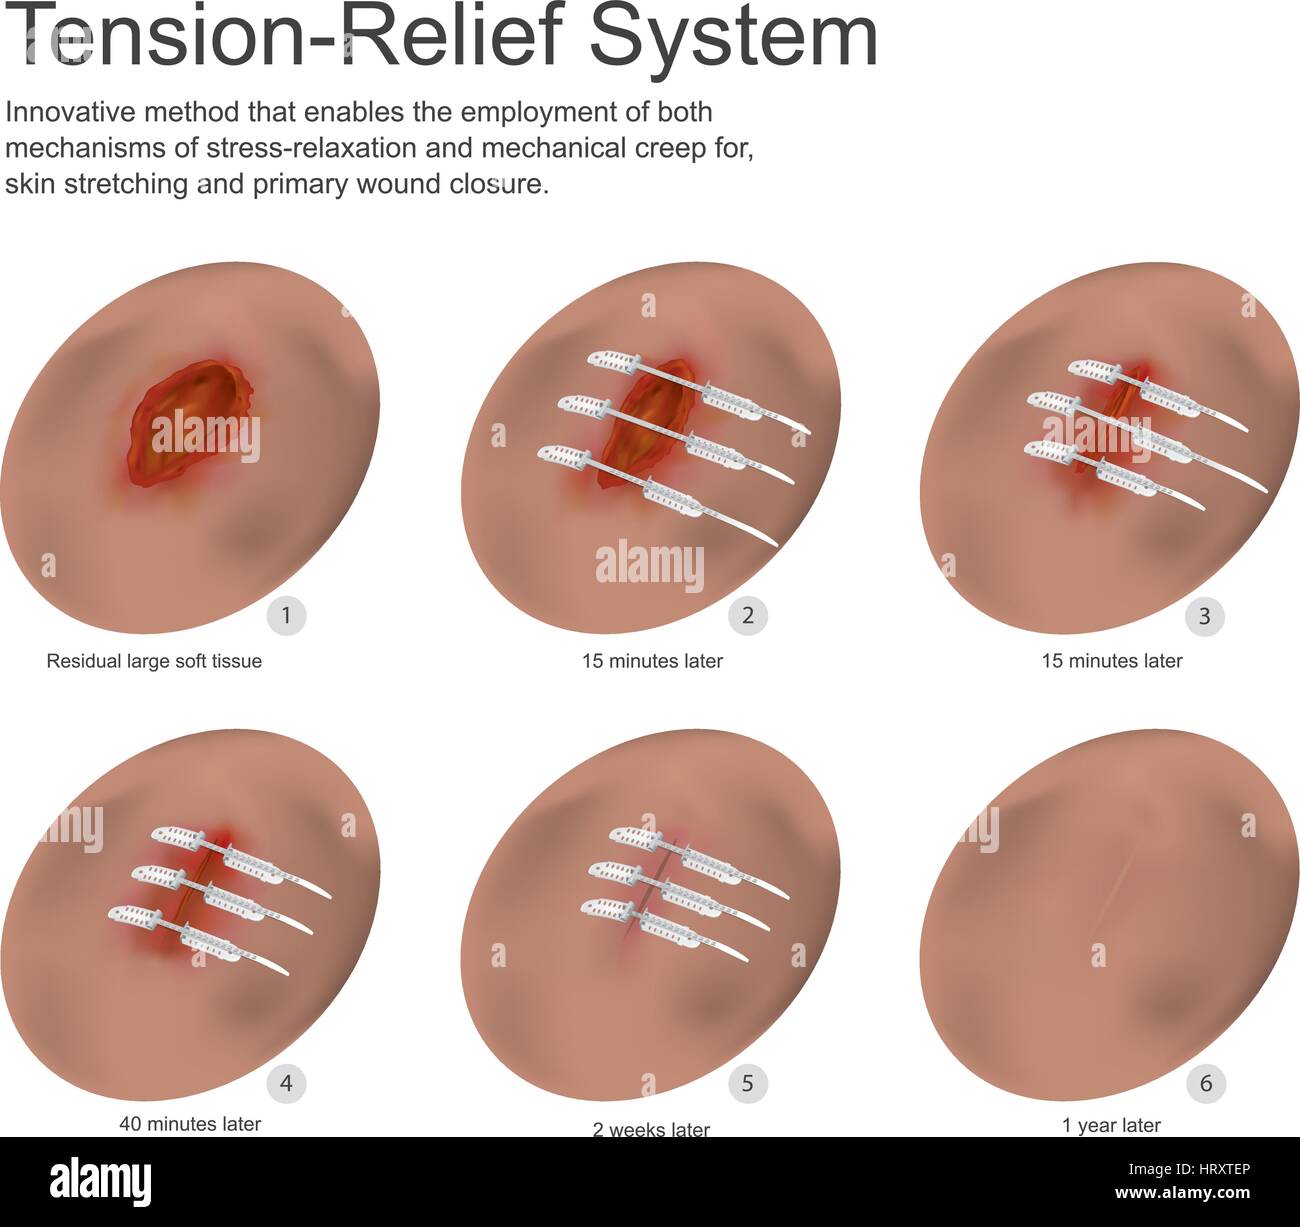 Tension relief system is an innovative method that enables the employment mechanisms of stress-relaxation and mechanical creep for skin stretching. Stock Vector